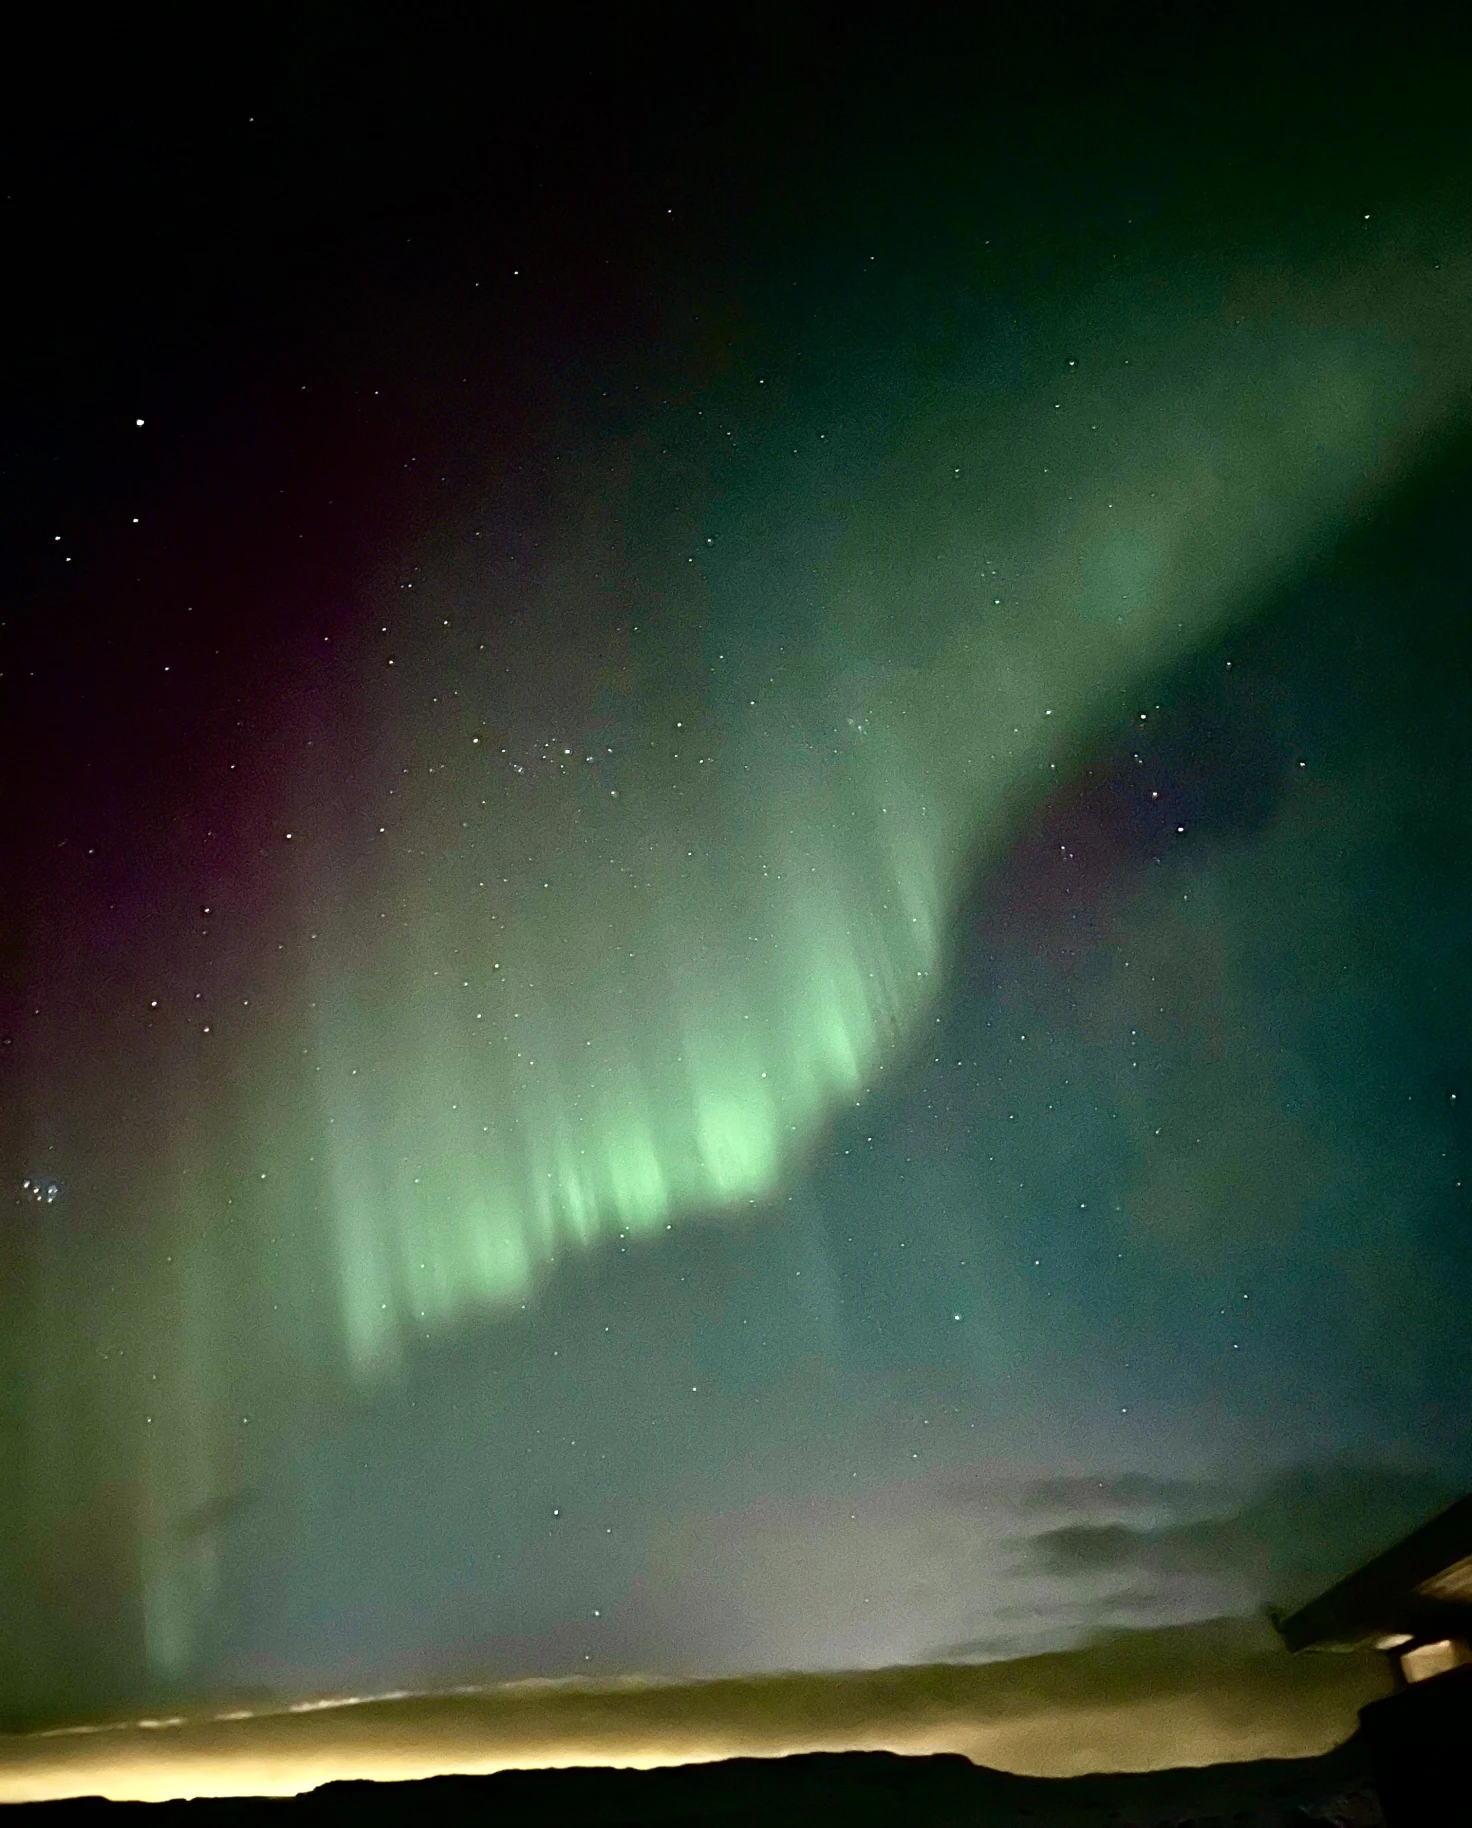 the green northern lights amidst starry skye